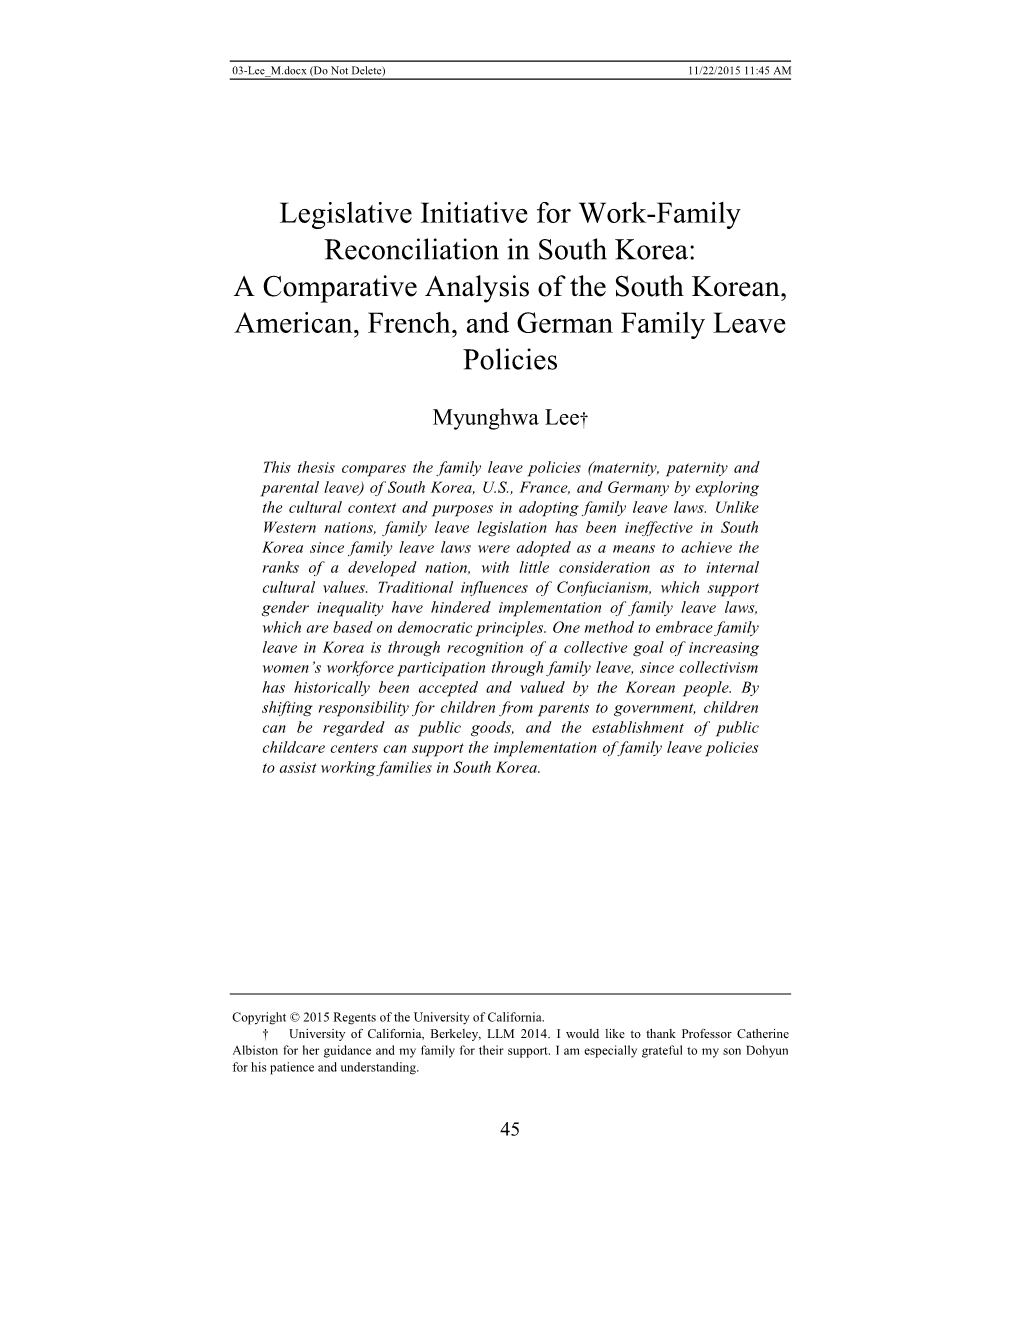 Legislative Initiative for Work-Family Reconciliation in South Korea: a Comparative Analysis of the South Korean, American, French, and German Family Leave Policies